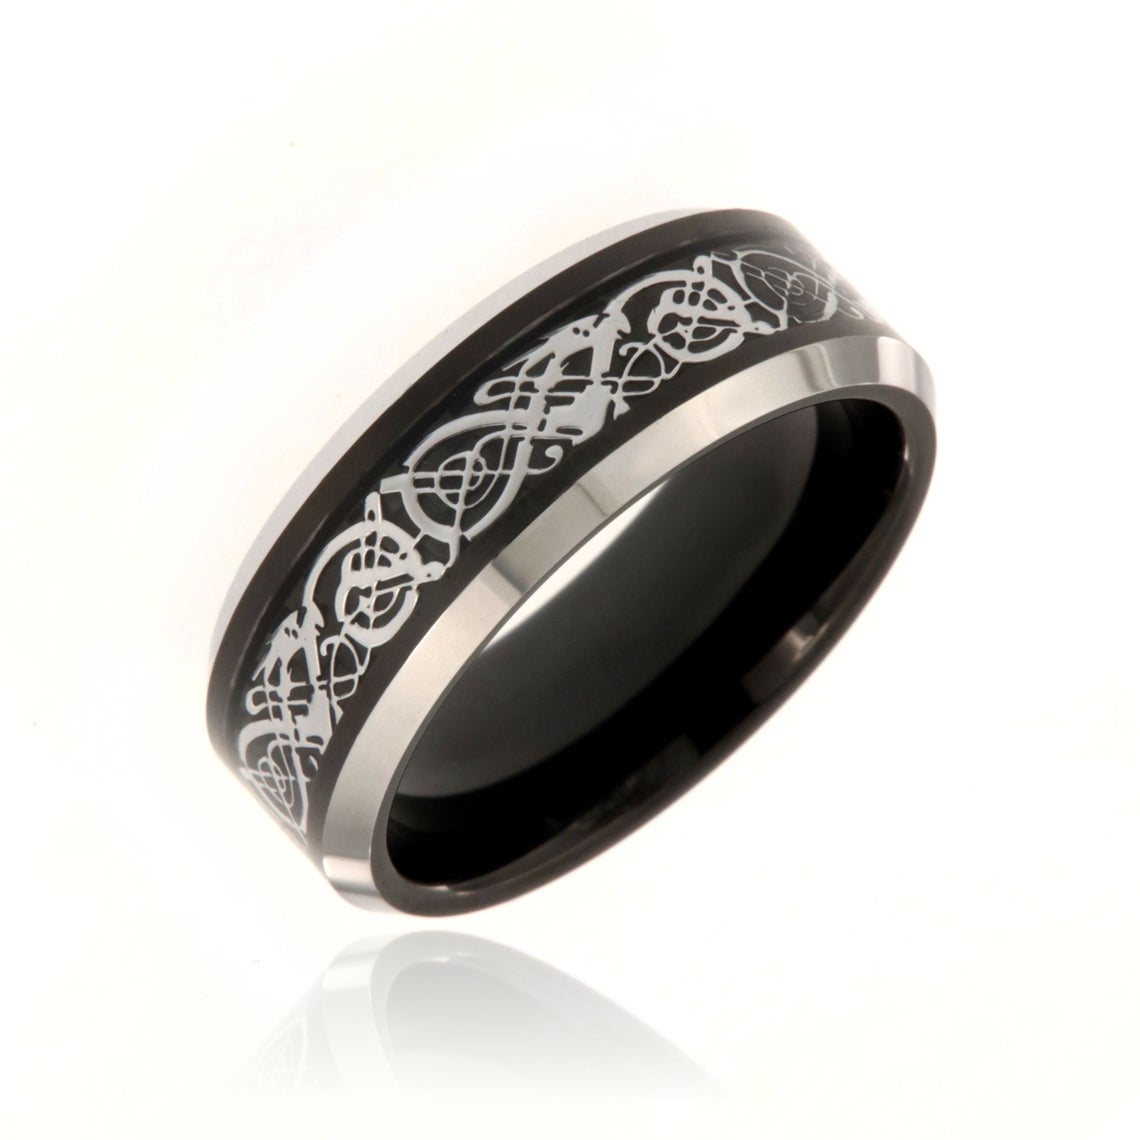 8mm wide tungsten ring with Celtic earth design and beveled edges